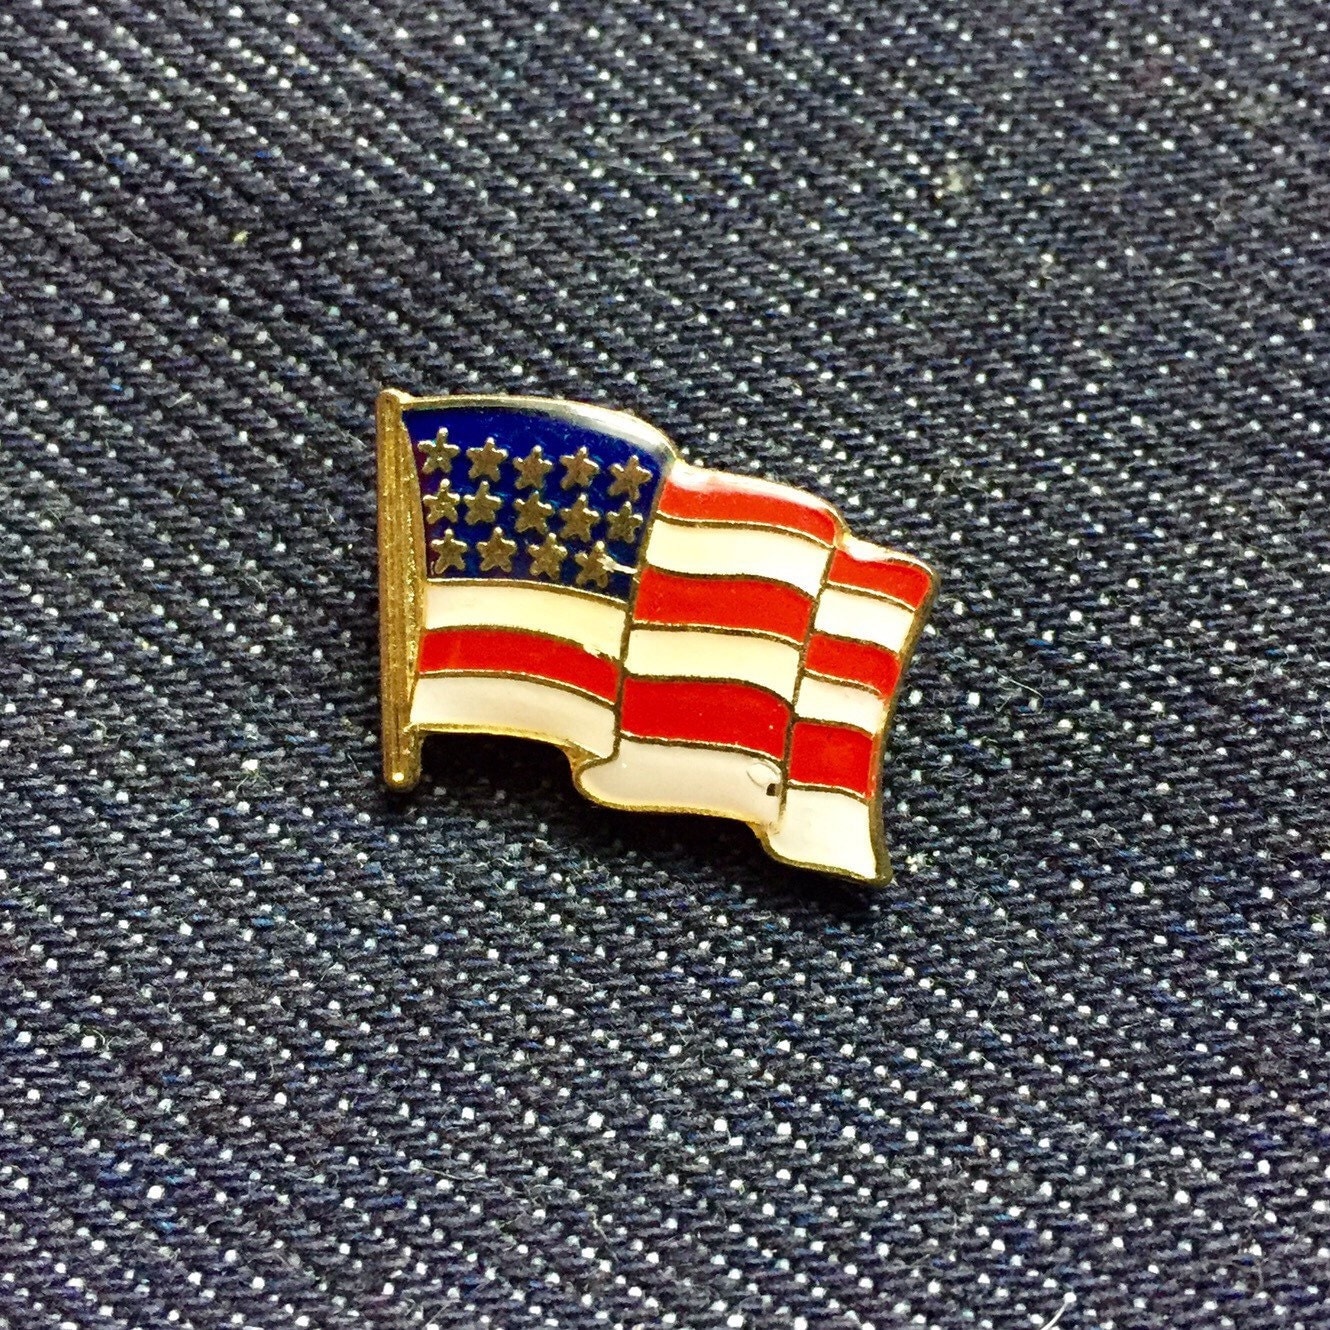 Vintage lapel pin or hat pin / American flag pin by FriendCenter